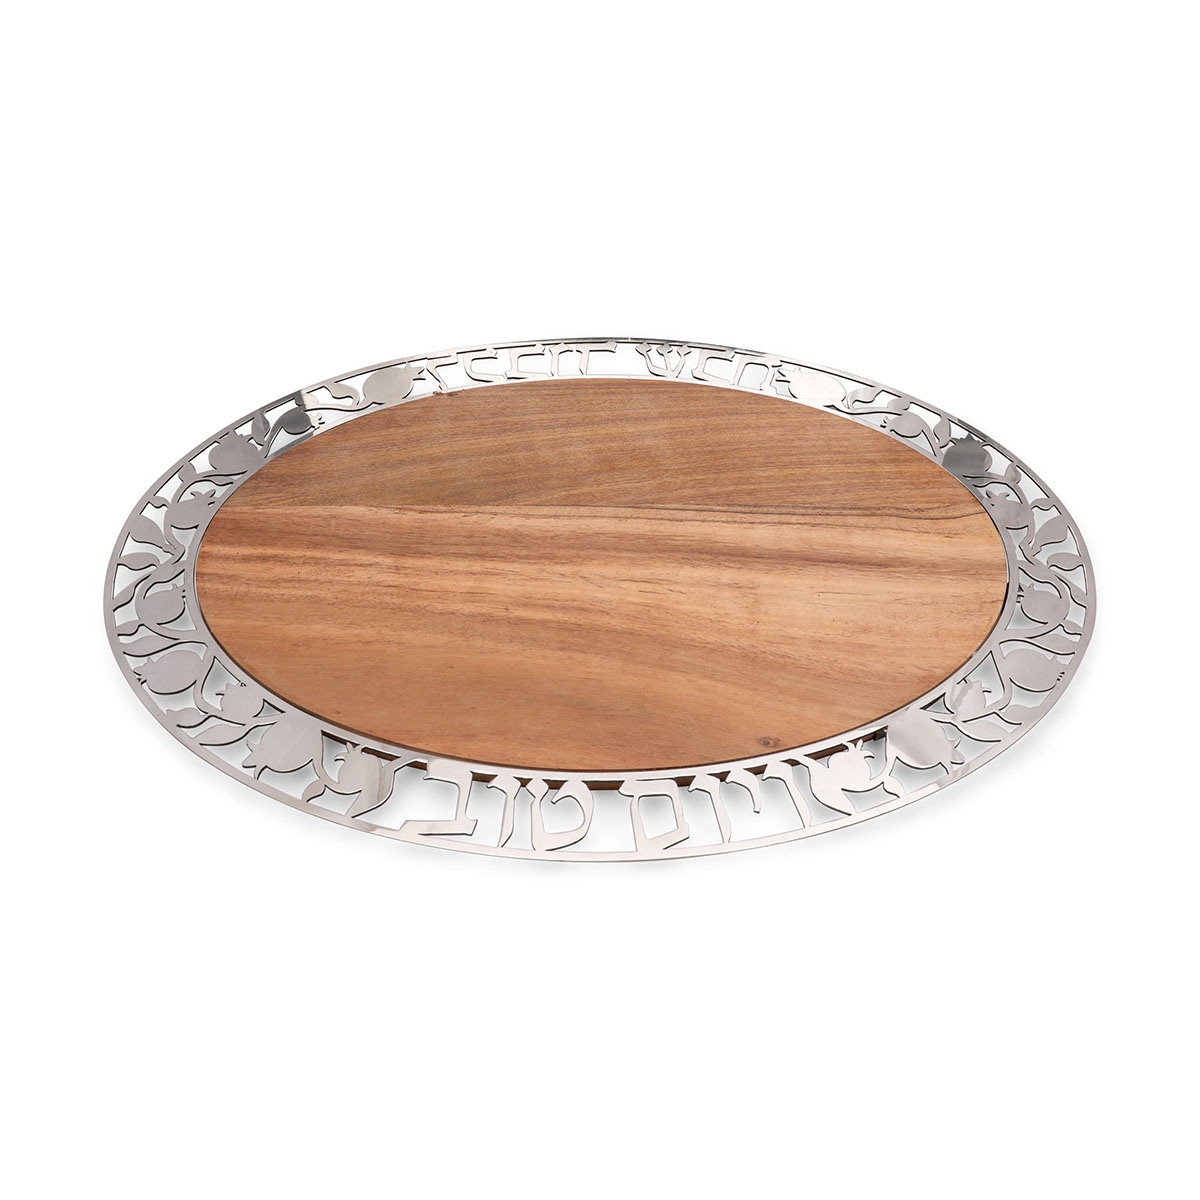 Yair Emanuel Round Wooden Challah Board With Pomegranate Design - 1